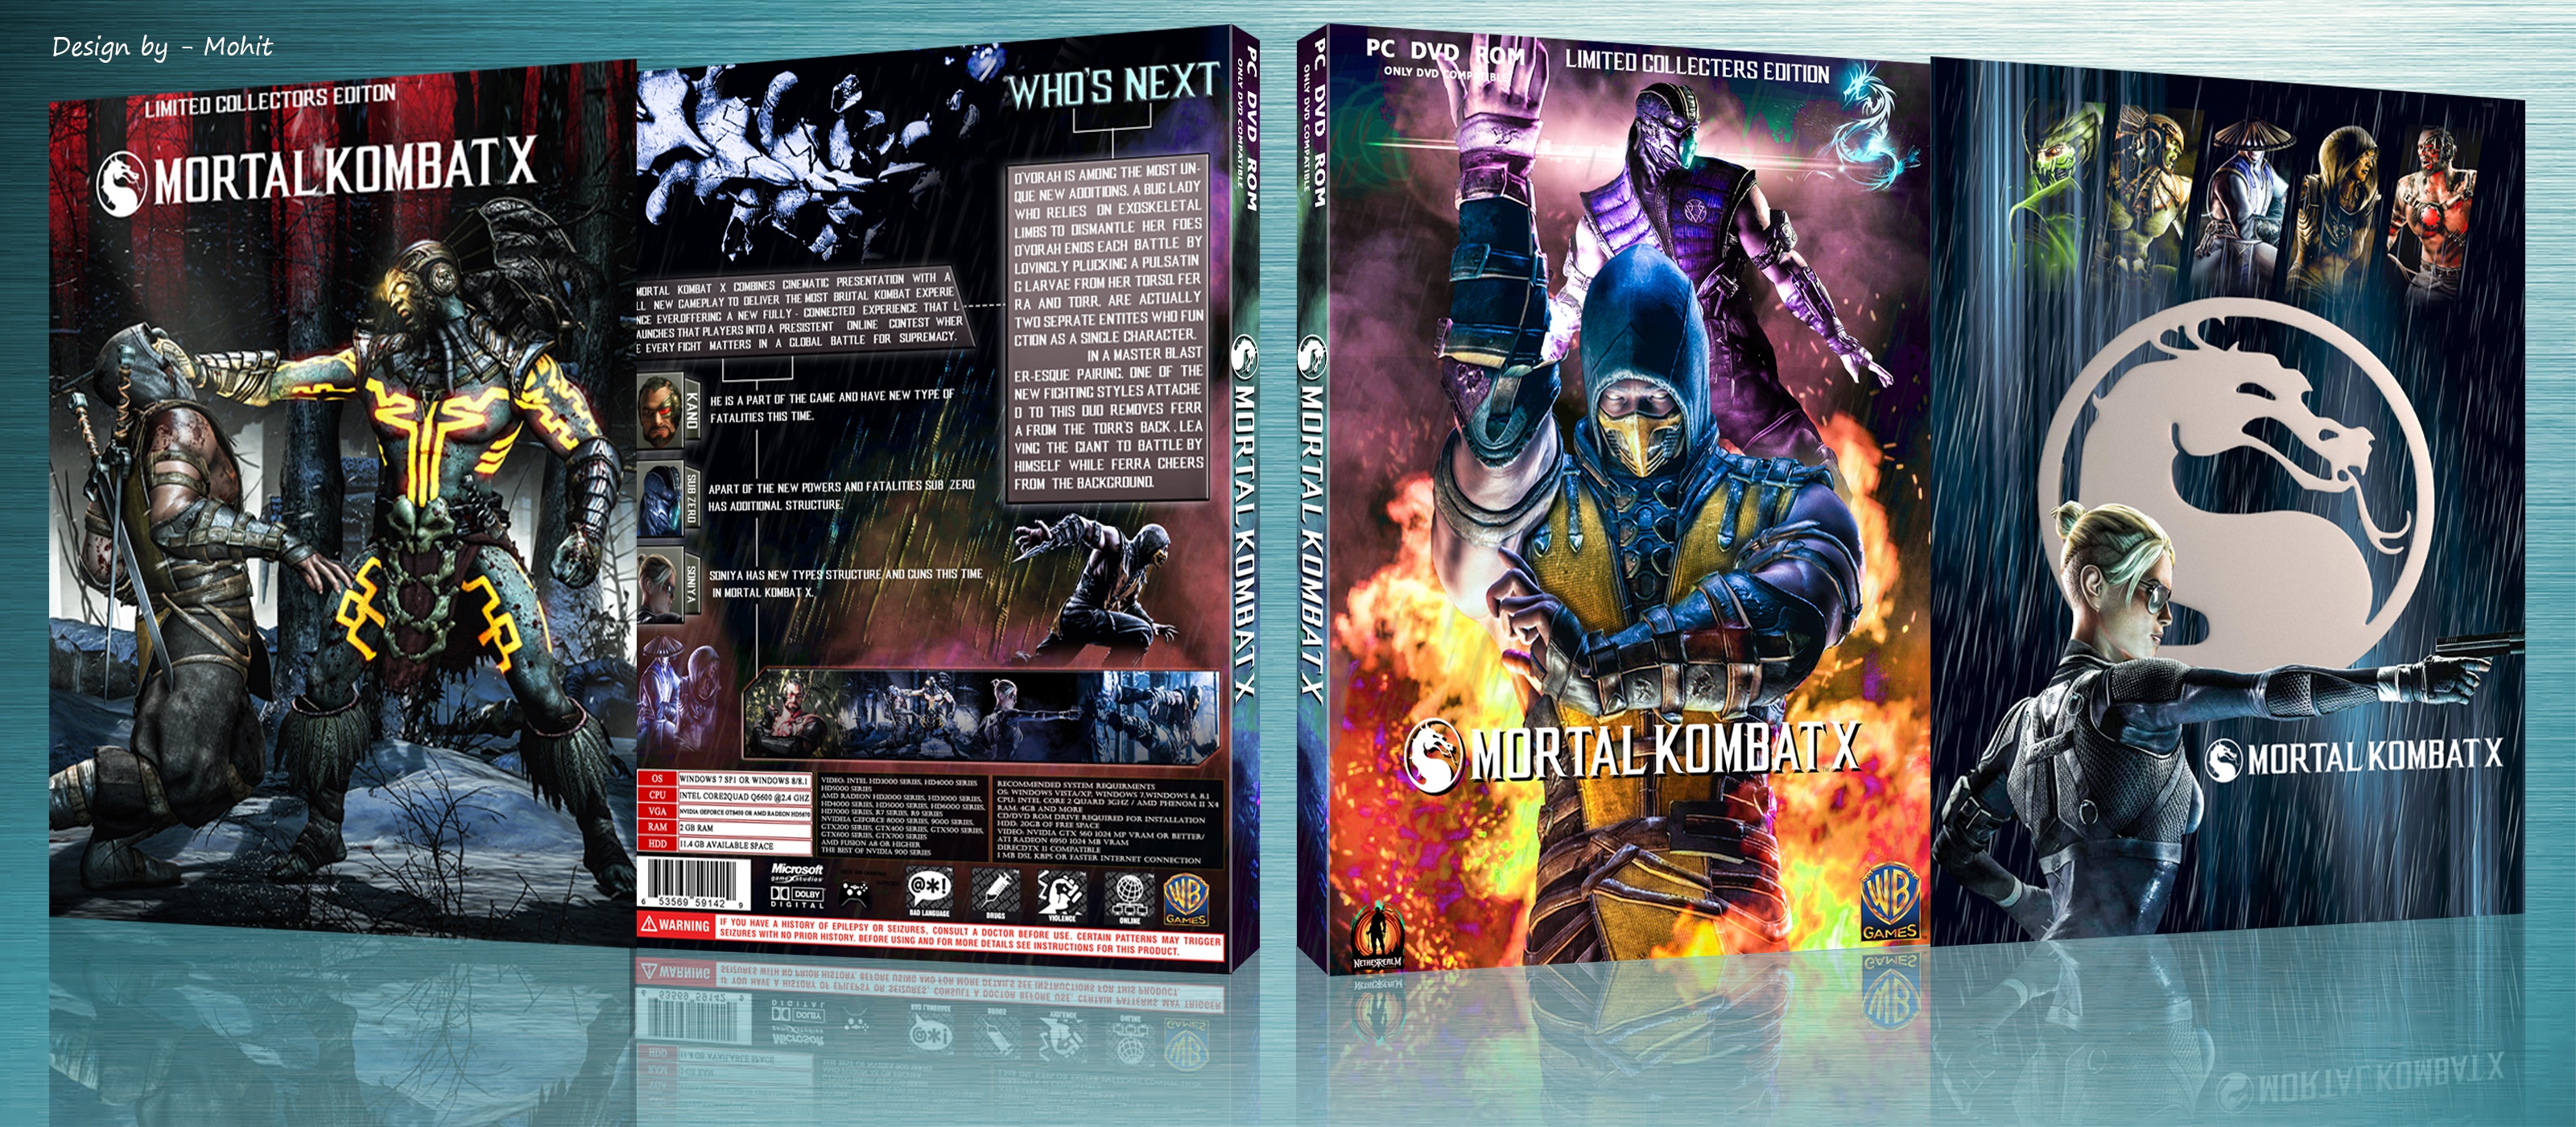 Mortal Kombat X : Limited collector's Edition box cover